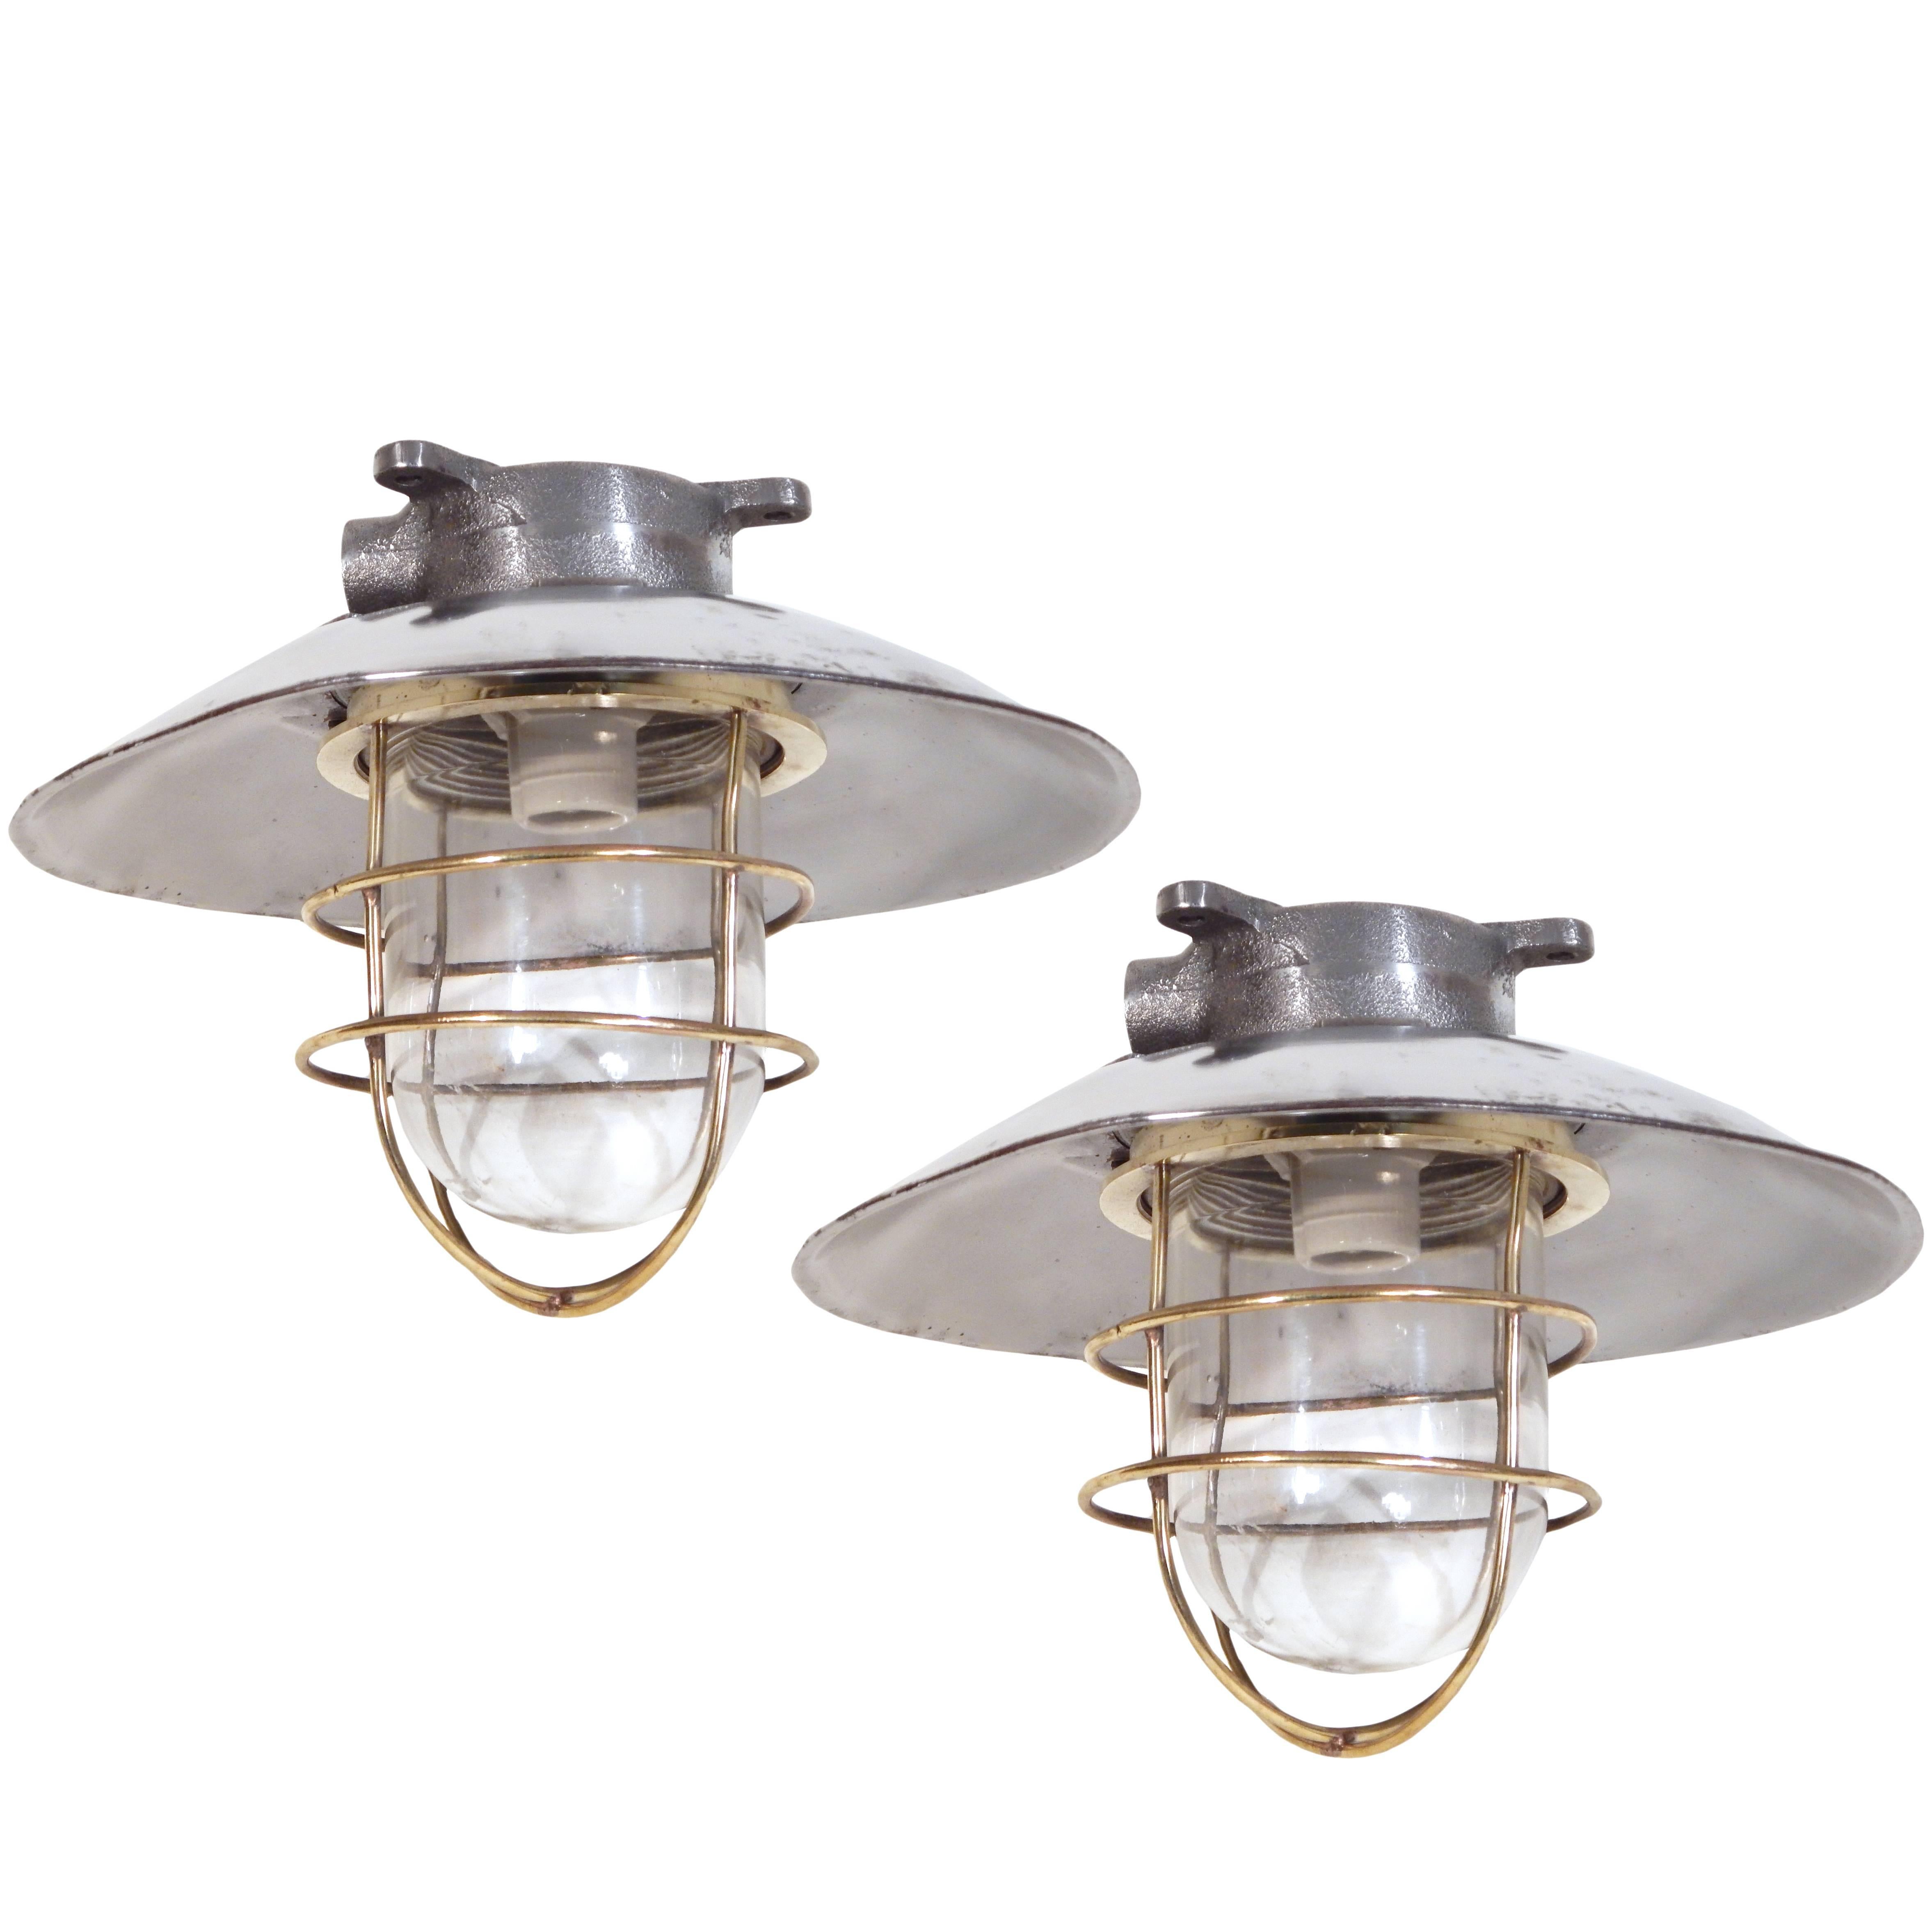 Nautical Steel Ceiling Fixture For Sale